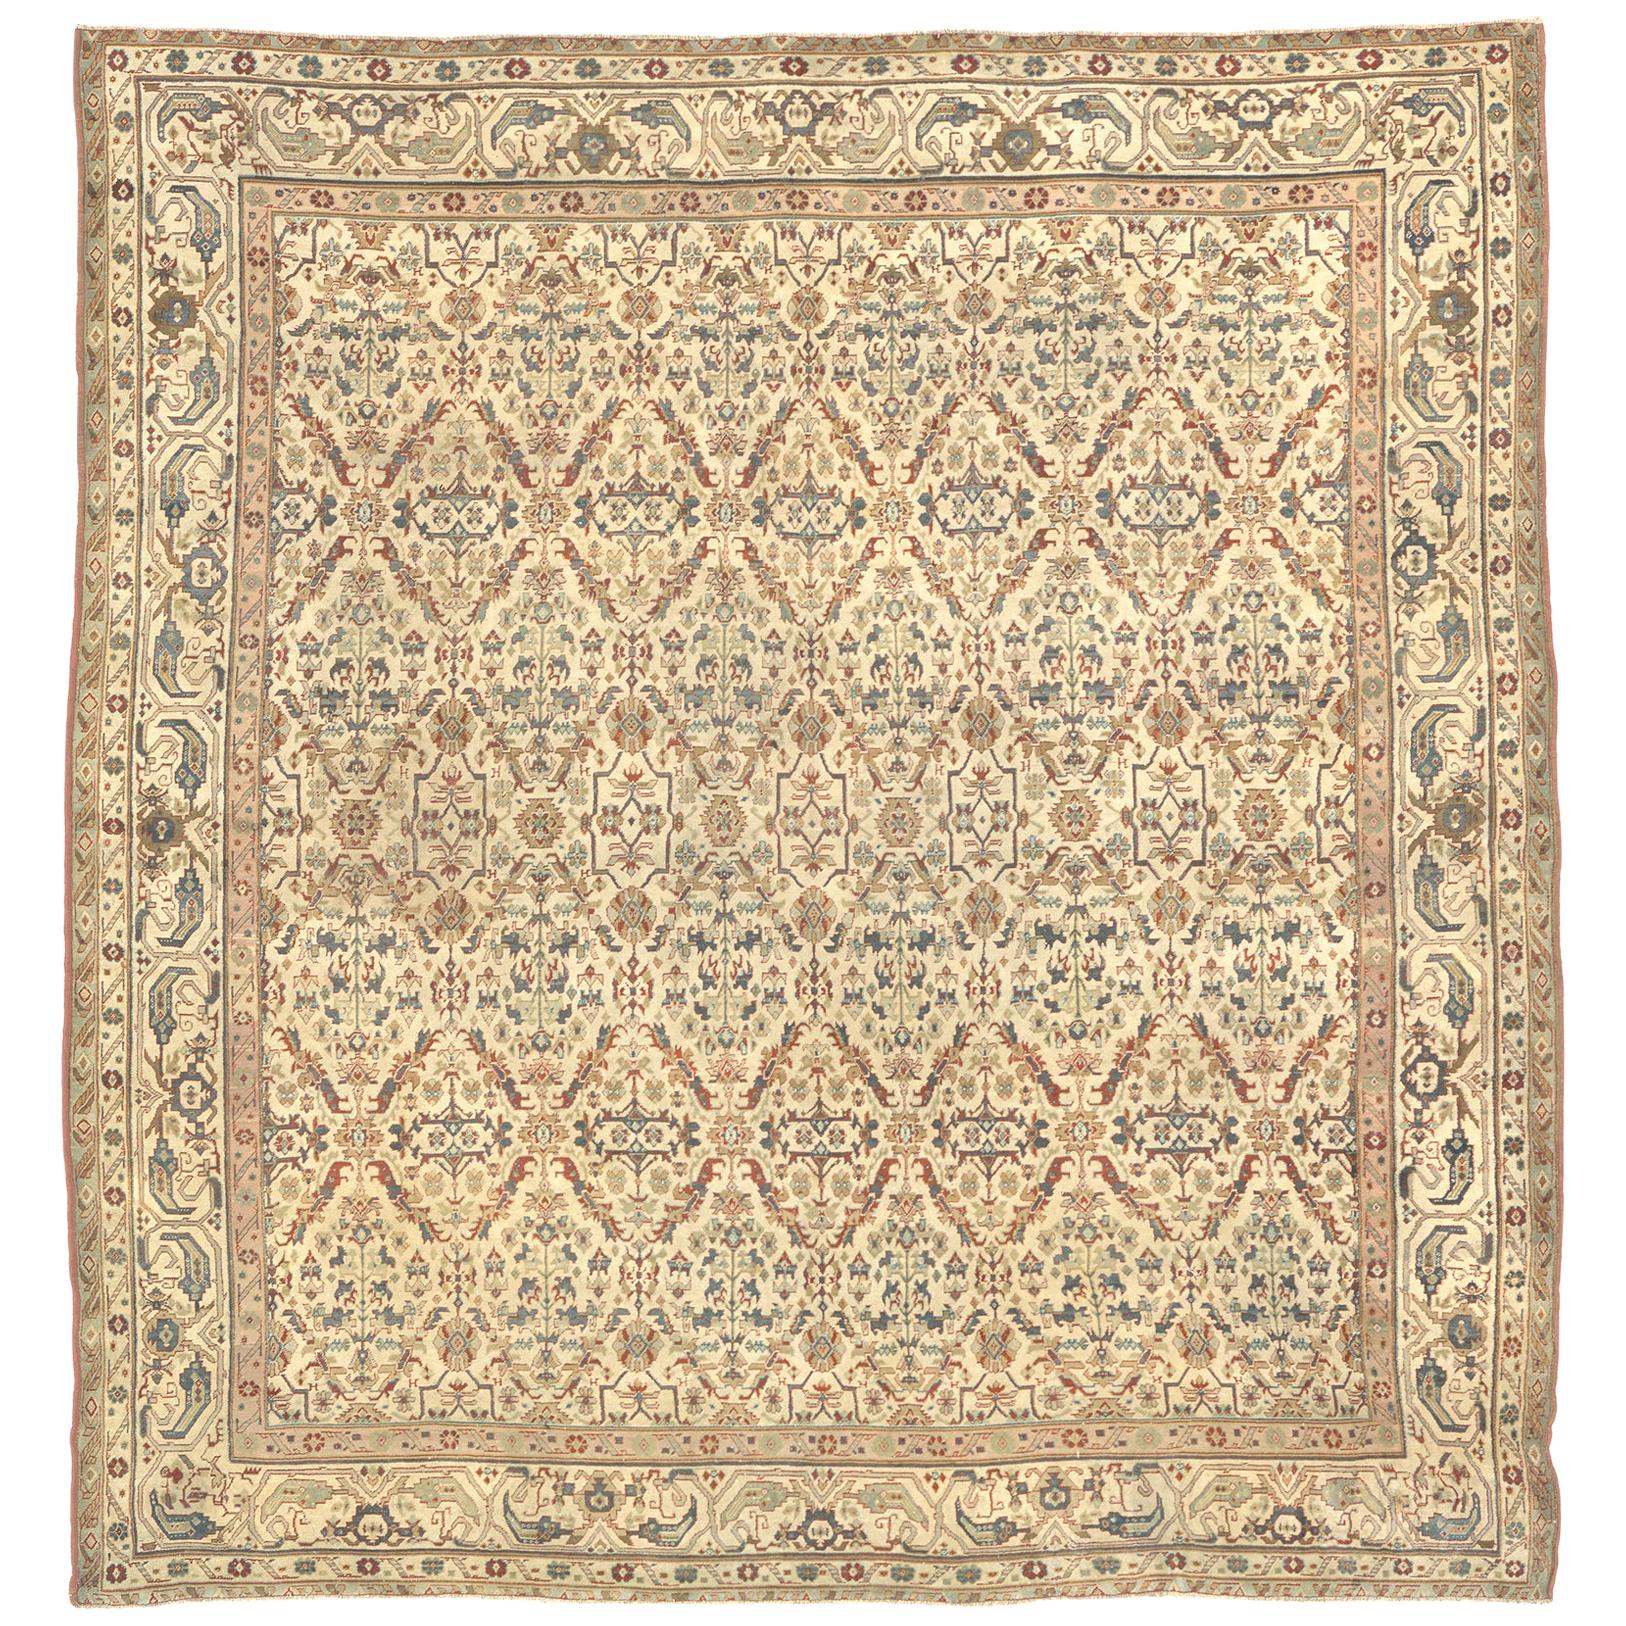 Early 20th Century Indian Agra Rug For Sale